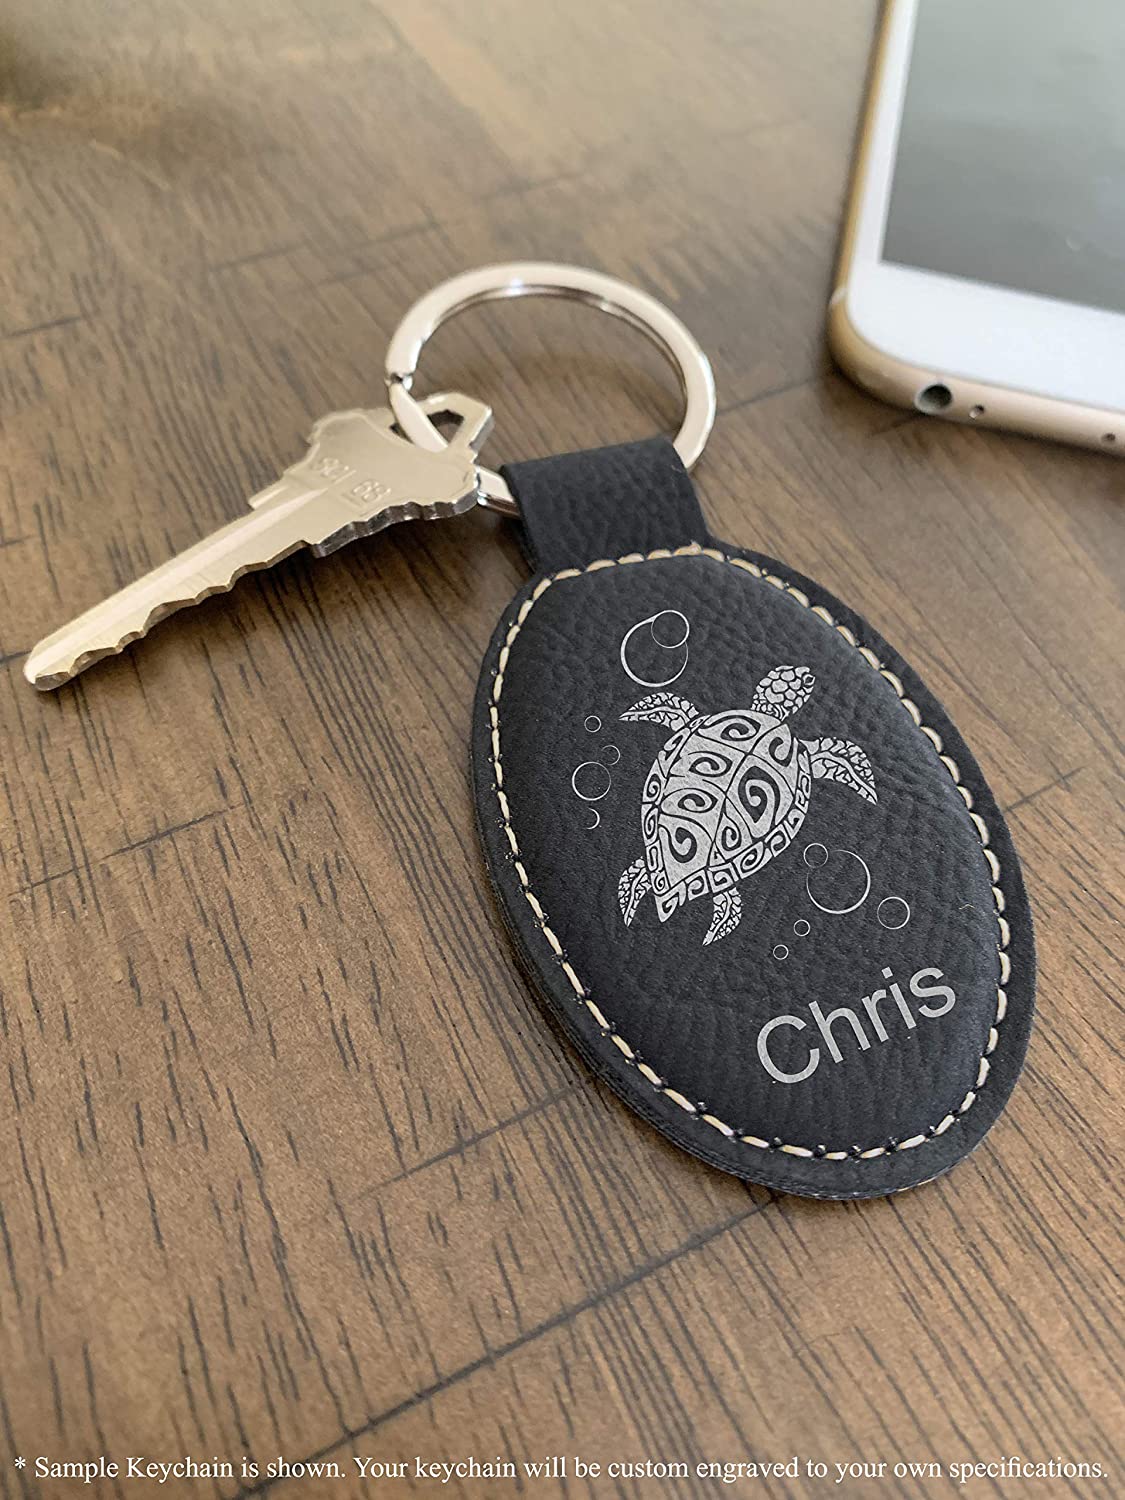 Faux Leather Oval Keychain, Marijuana leaf, Personalized Engraving Included